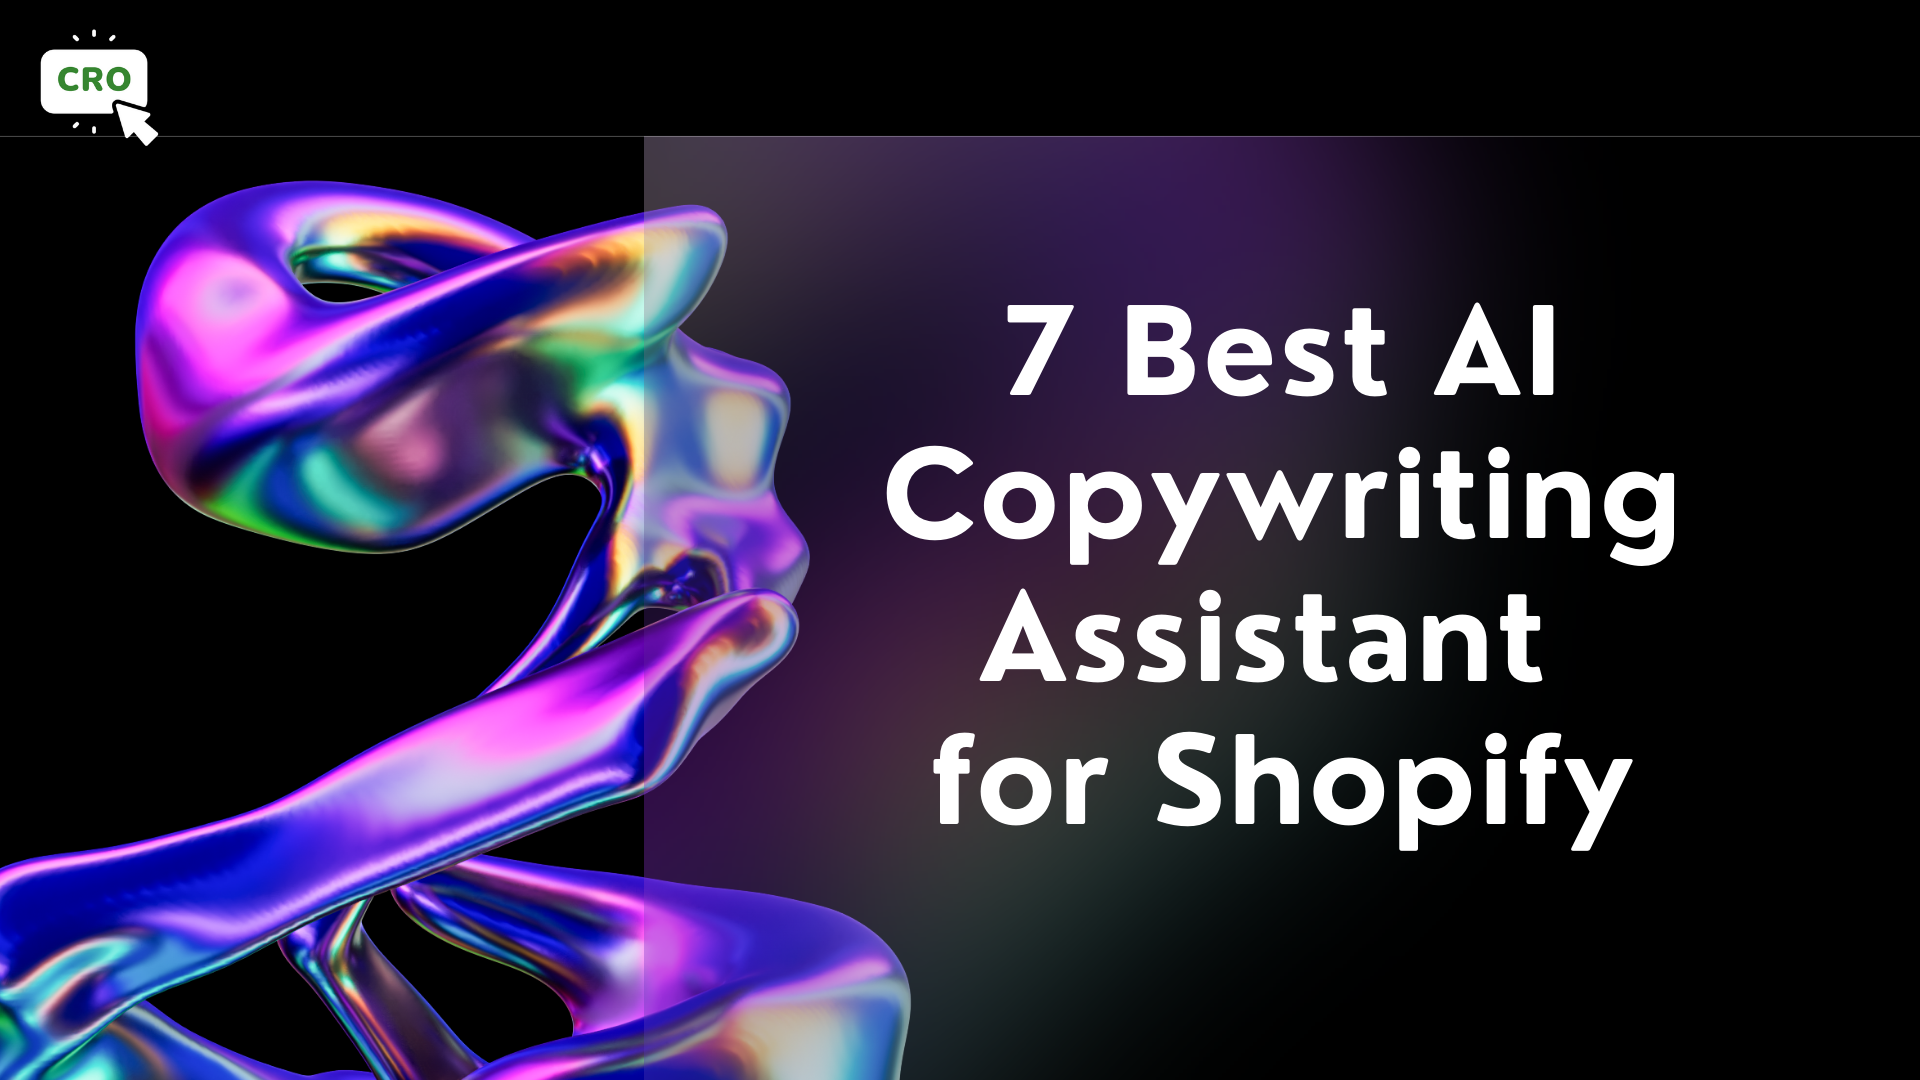 7 Best AI Copywriting Assistant for Shopify